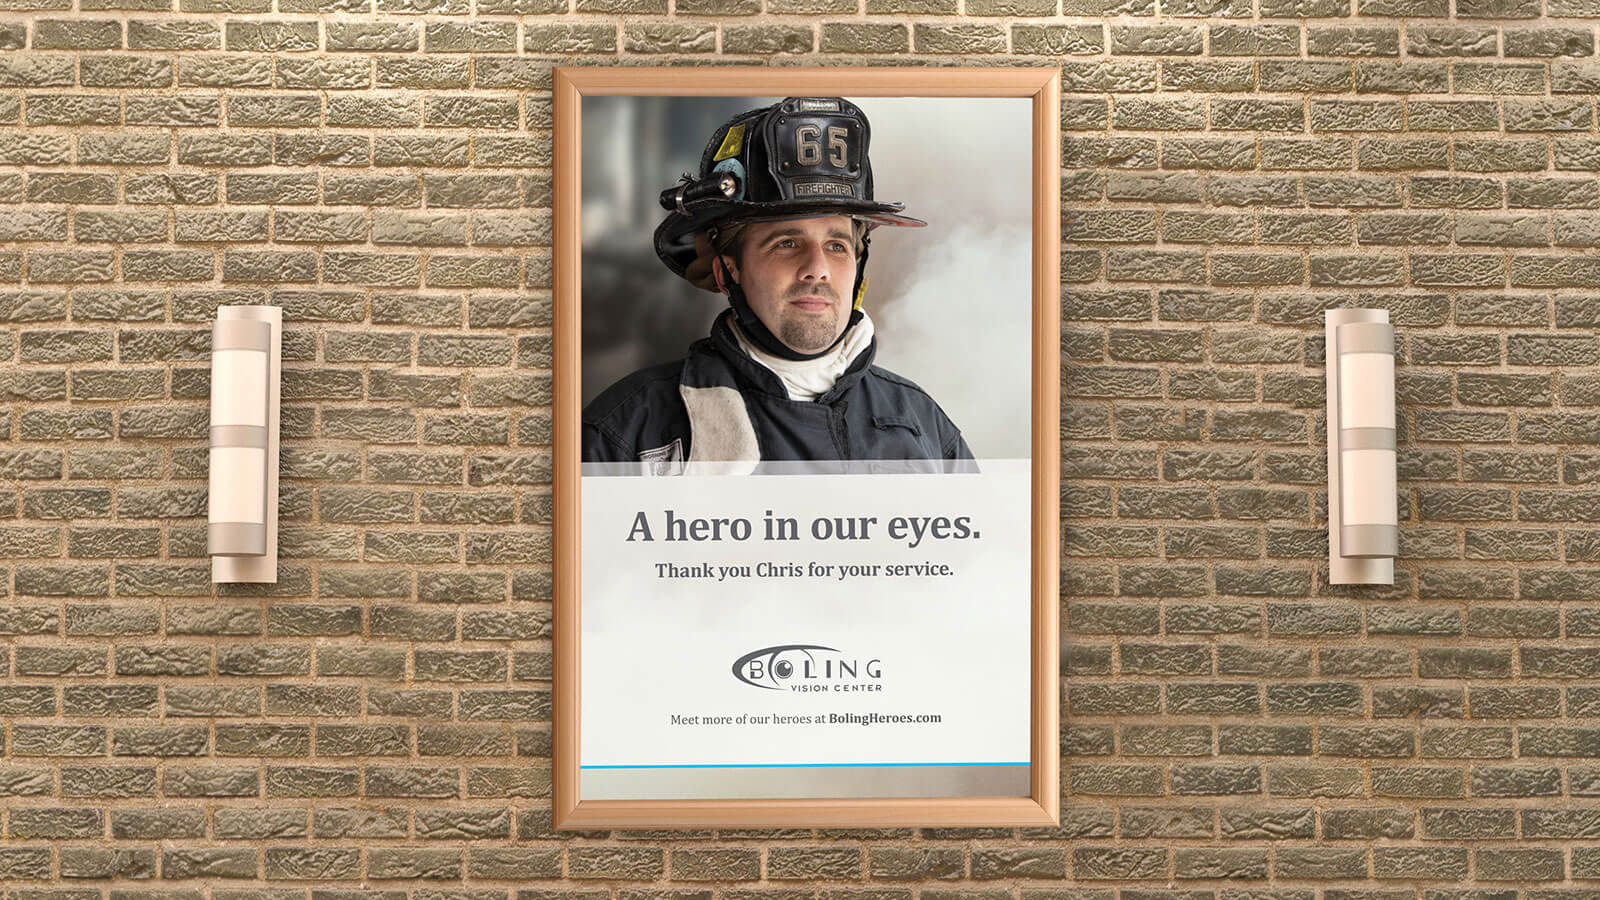 Boling Vision Center <strong>Heroes Campaign</strong>